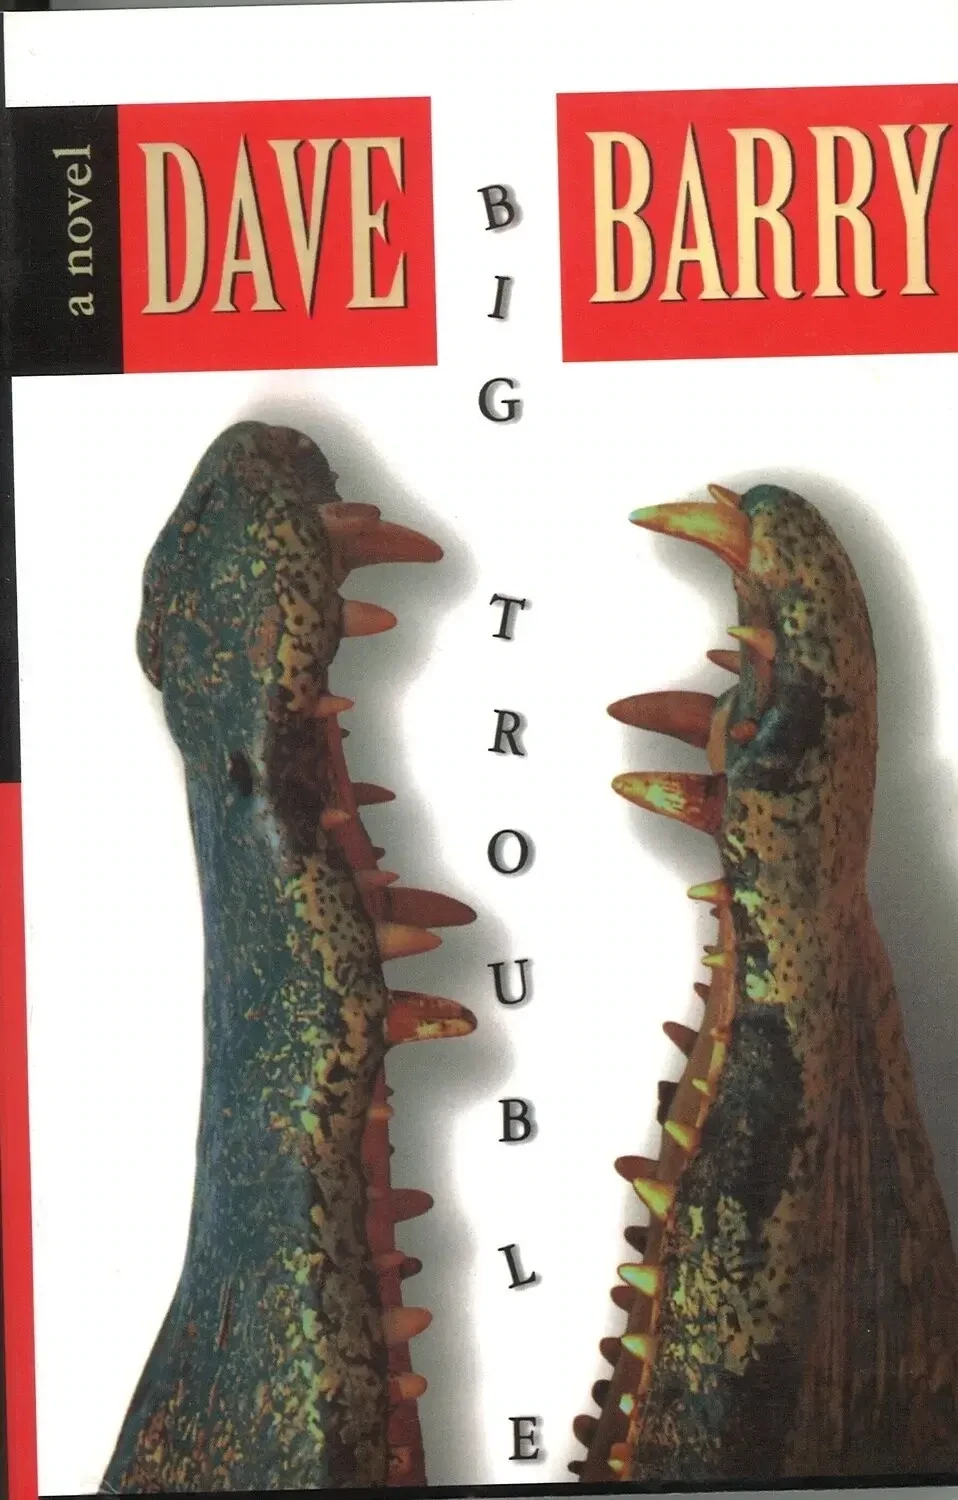 Big Trouble (Large Print) by Dave Barry